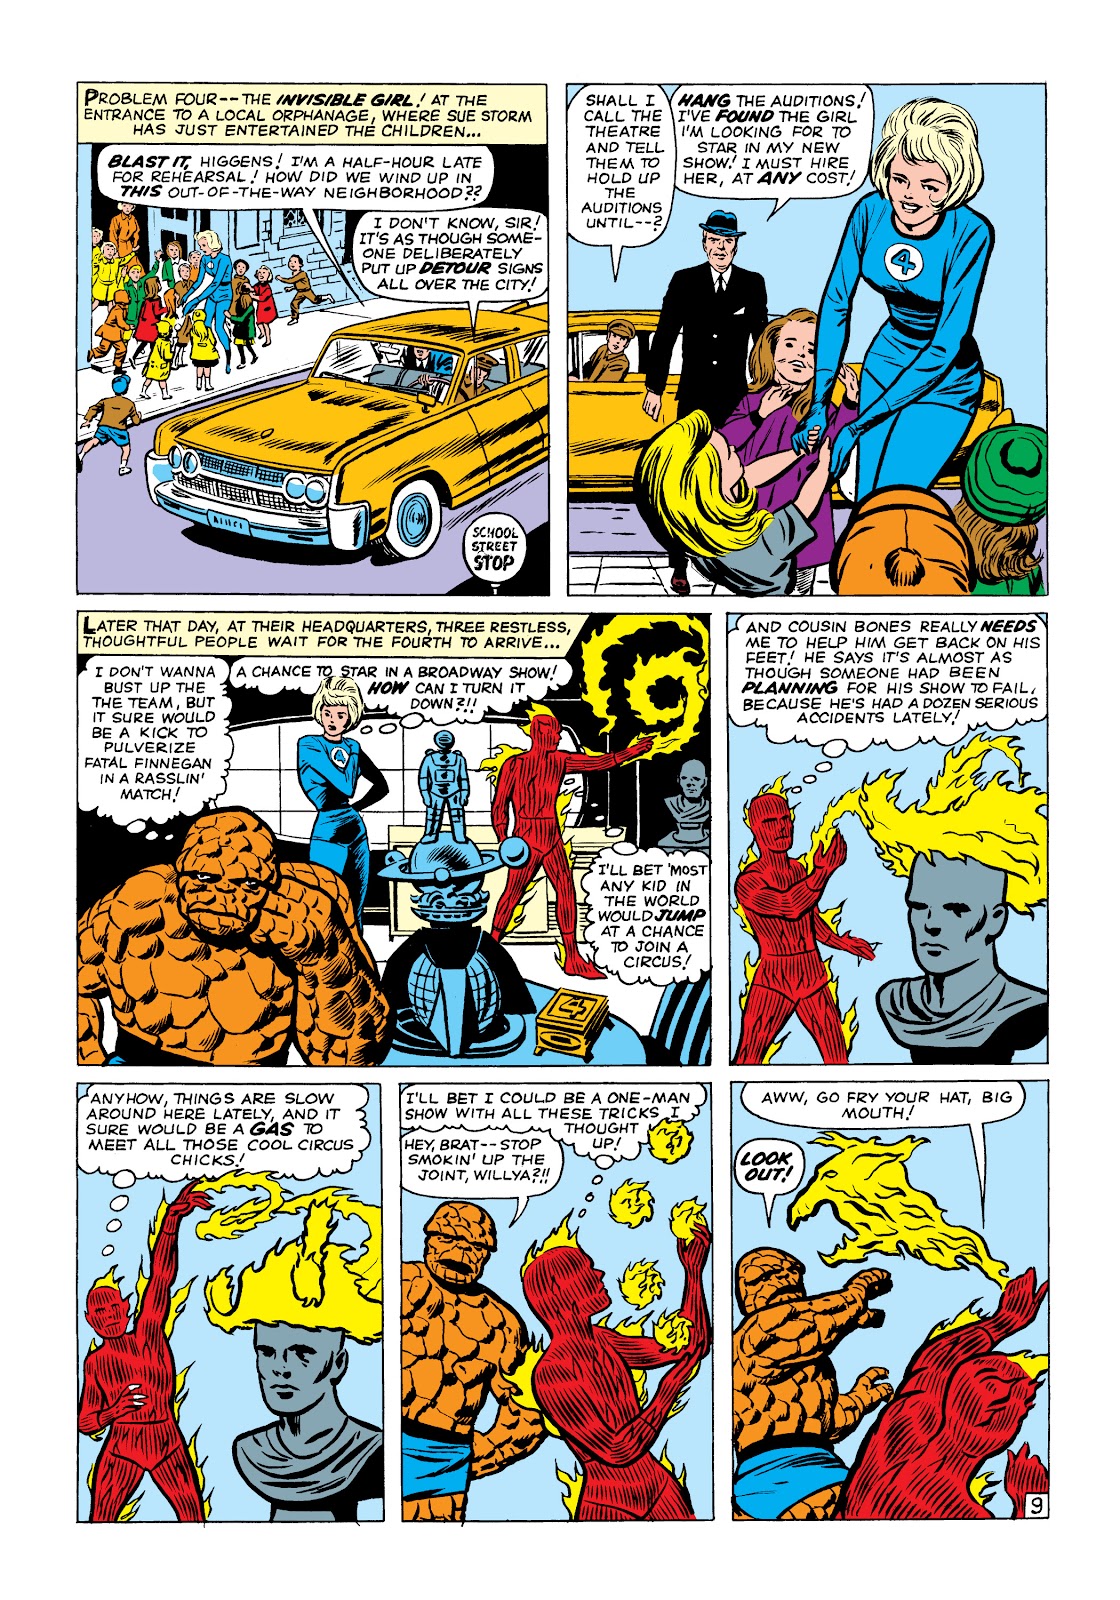 Read online Marvel Masterworks: The Fantastic Four comic - Issue # TPB 2 (Part 2) - 9